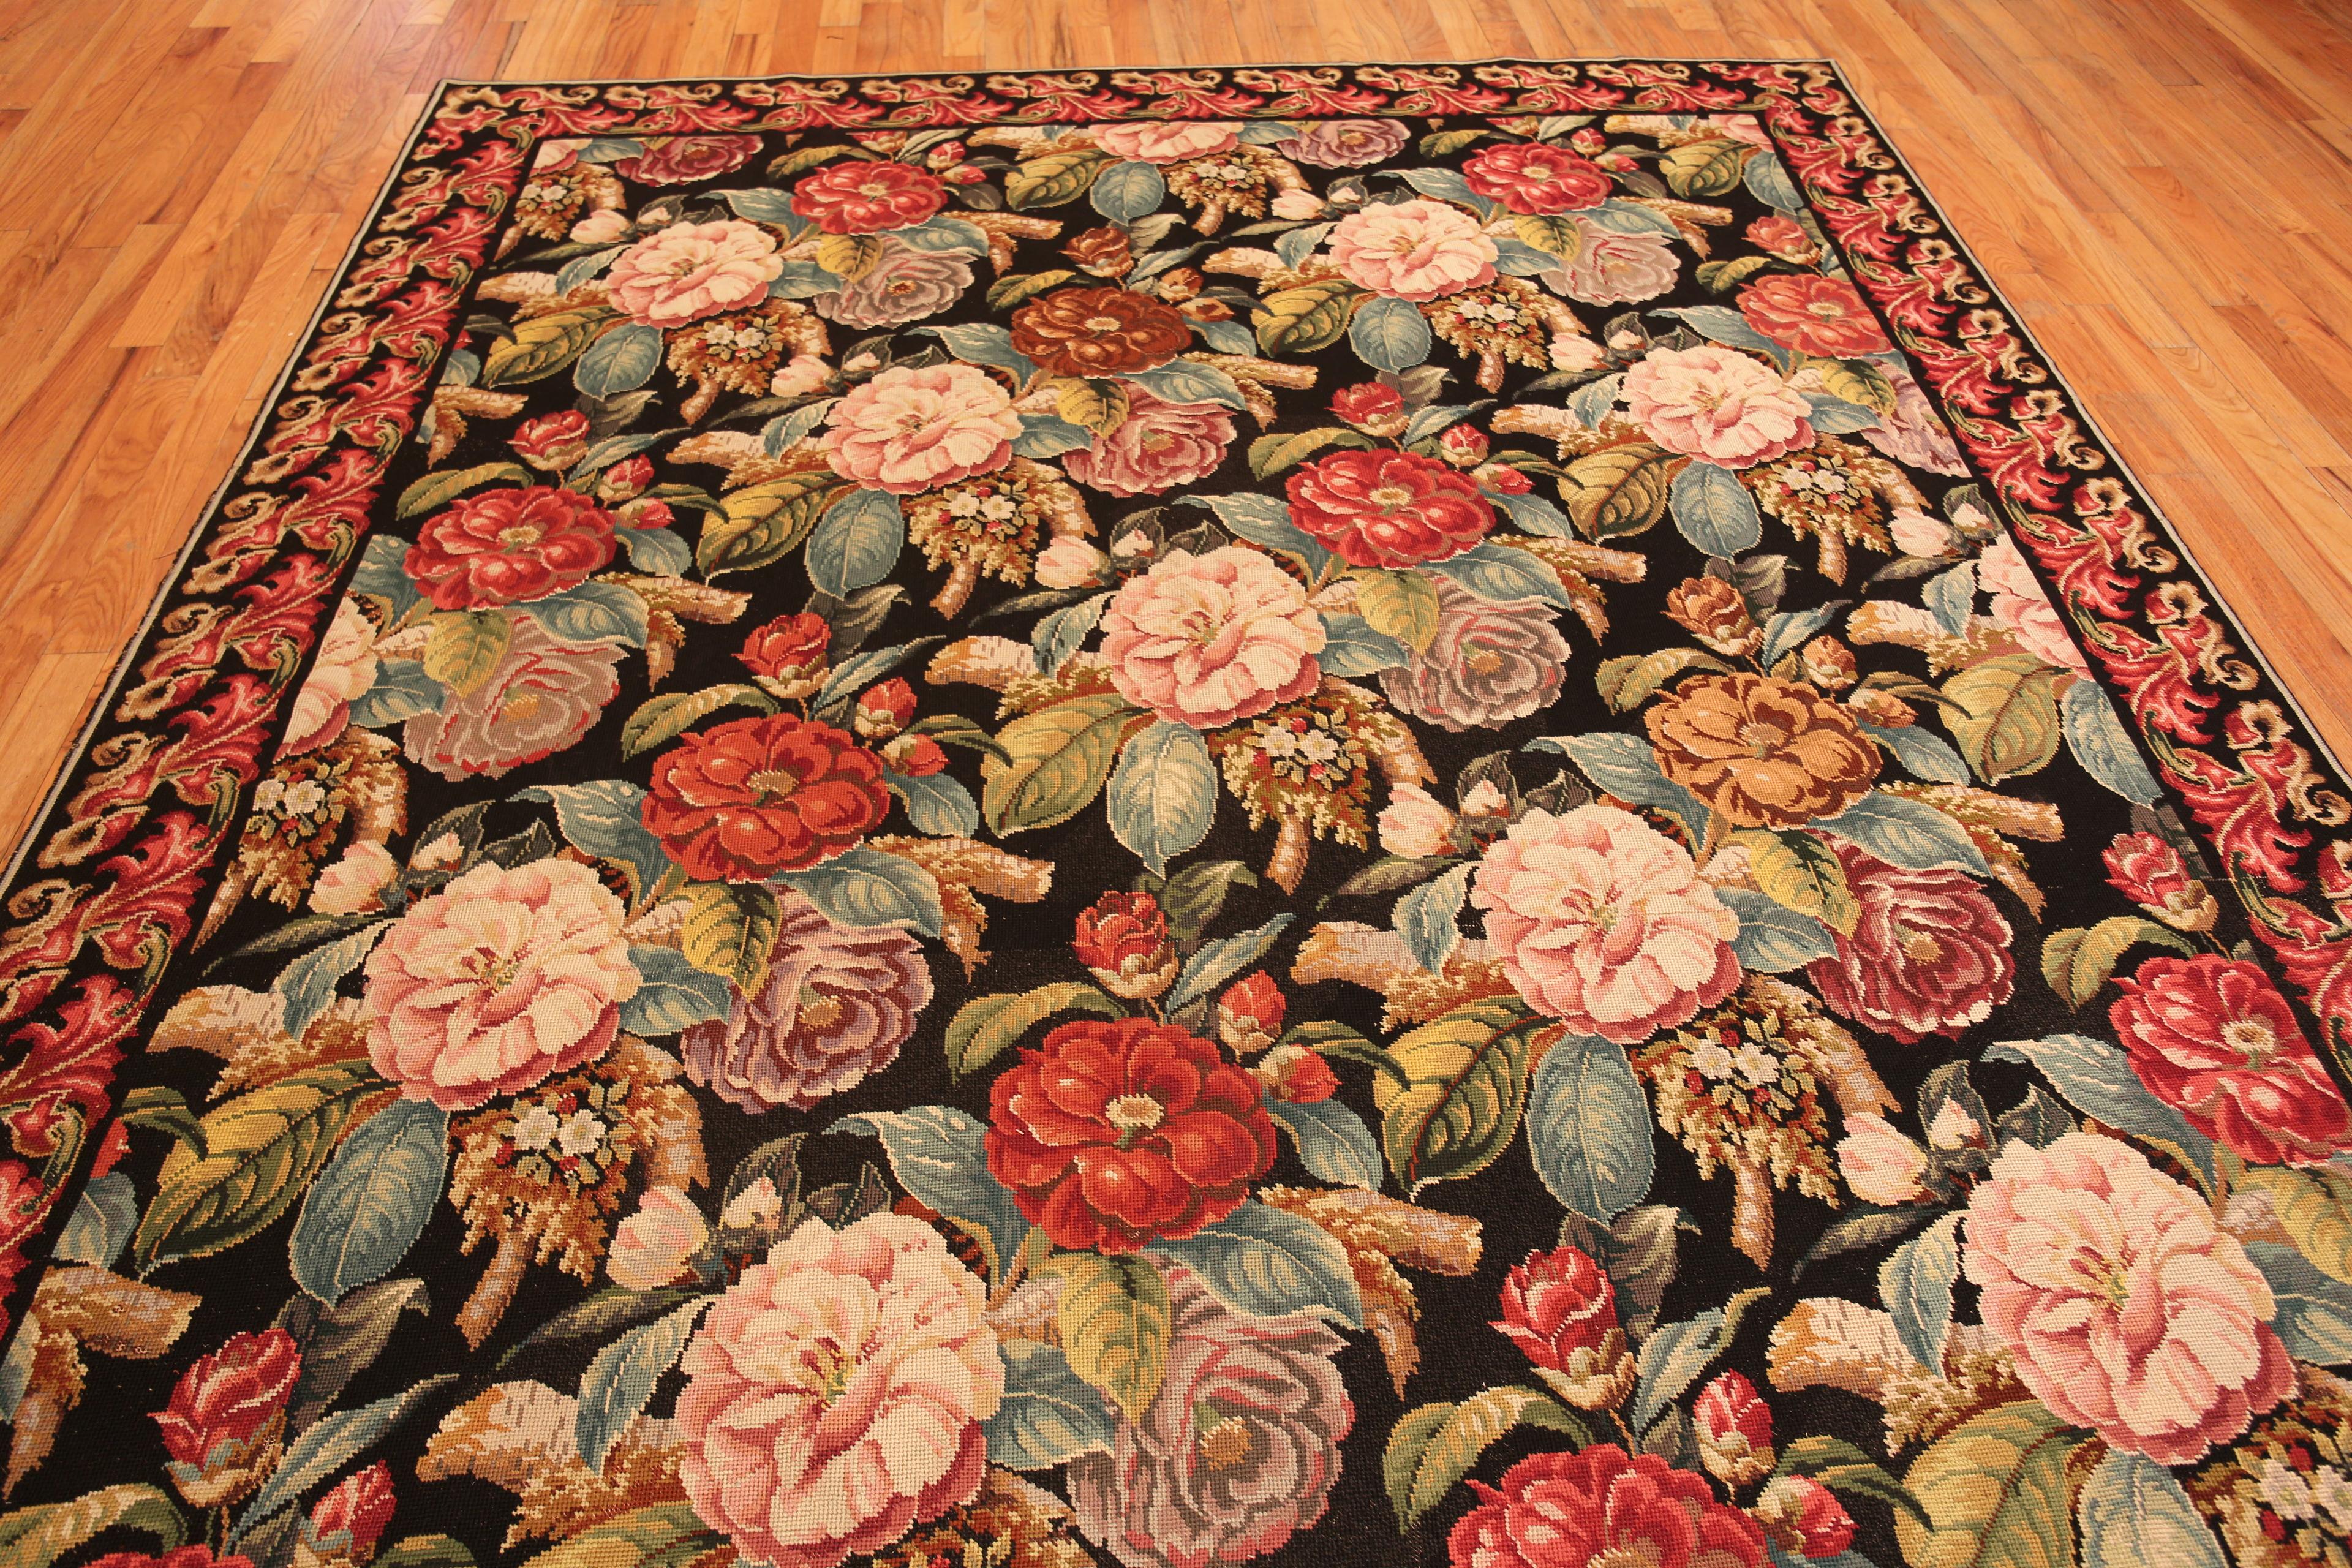 Floral Antique English Needlepoint Rug, Country of origin: England, Circa date: 1920. Size: 8 ft 8 in x 10 ft 5 in (2.64 m x 3.17 m)